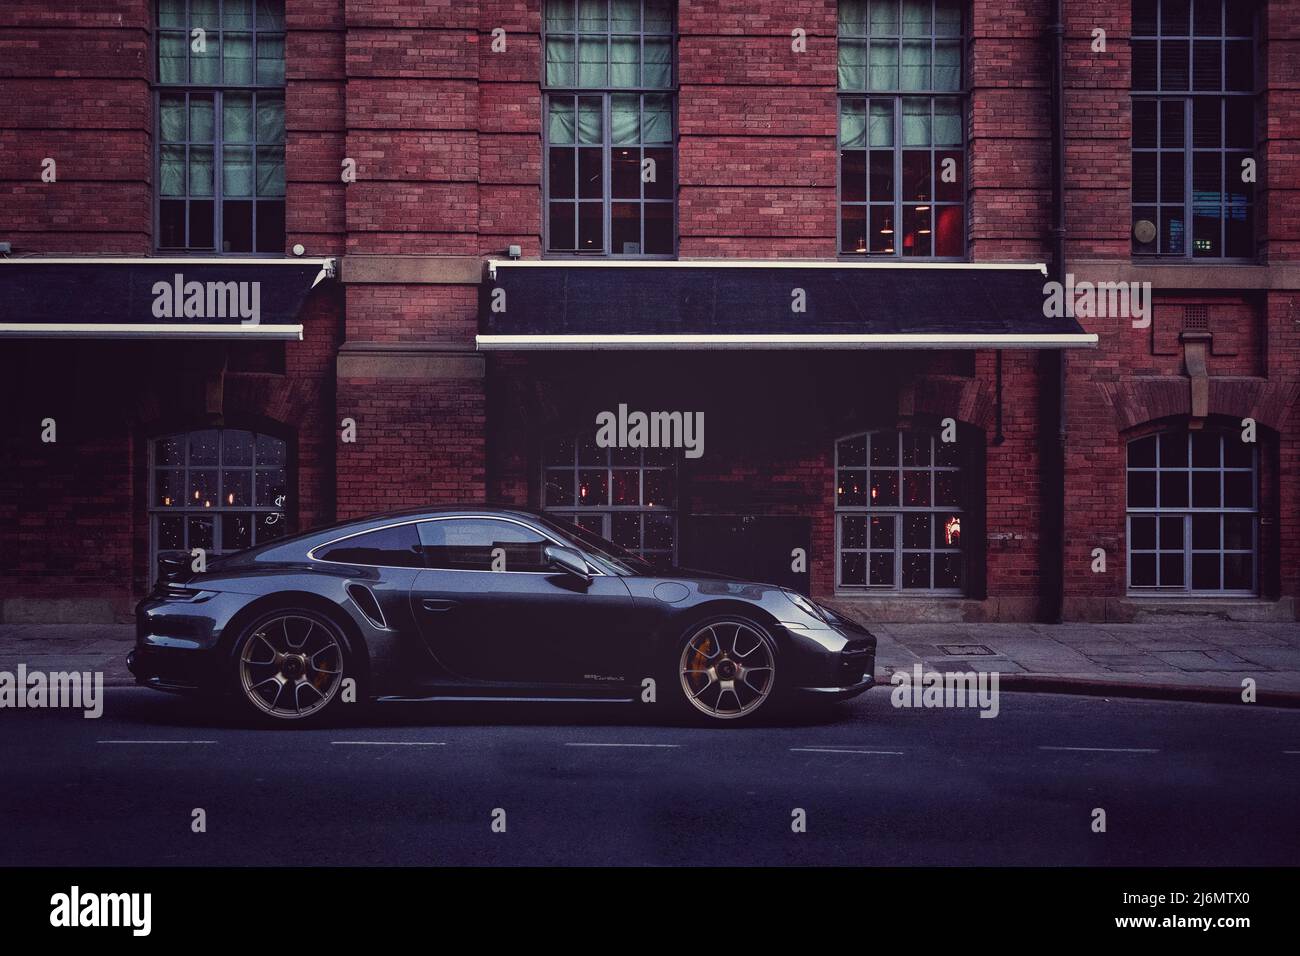 A luxury sports car outside a warehouse apartment building in a desirable area of a UK city like London Stock Photo